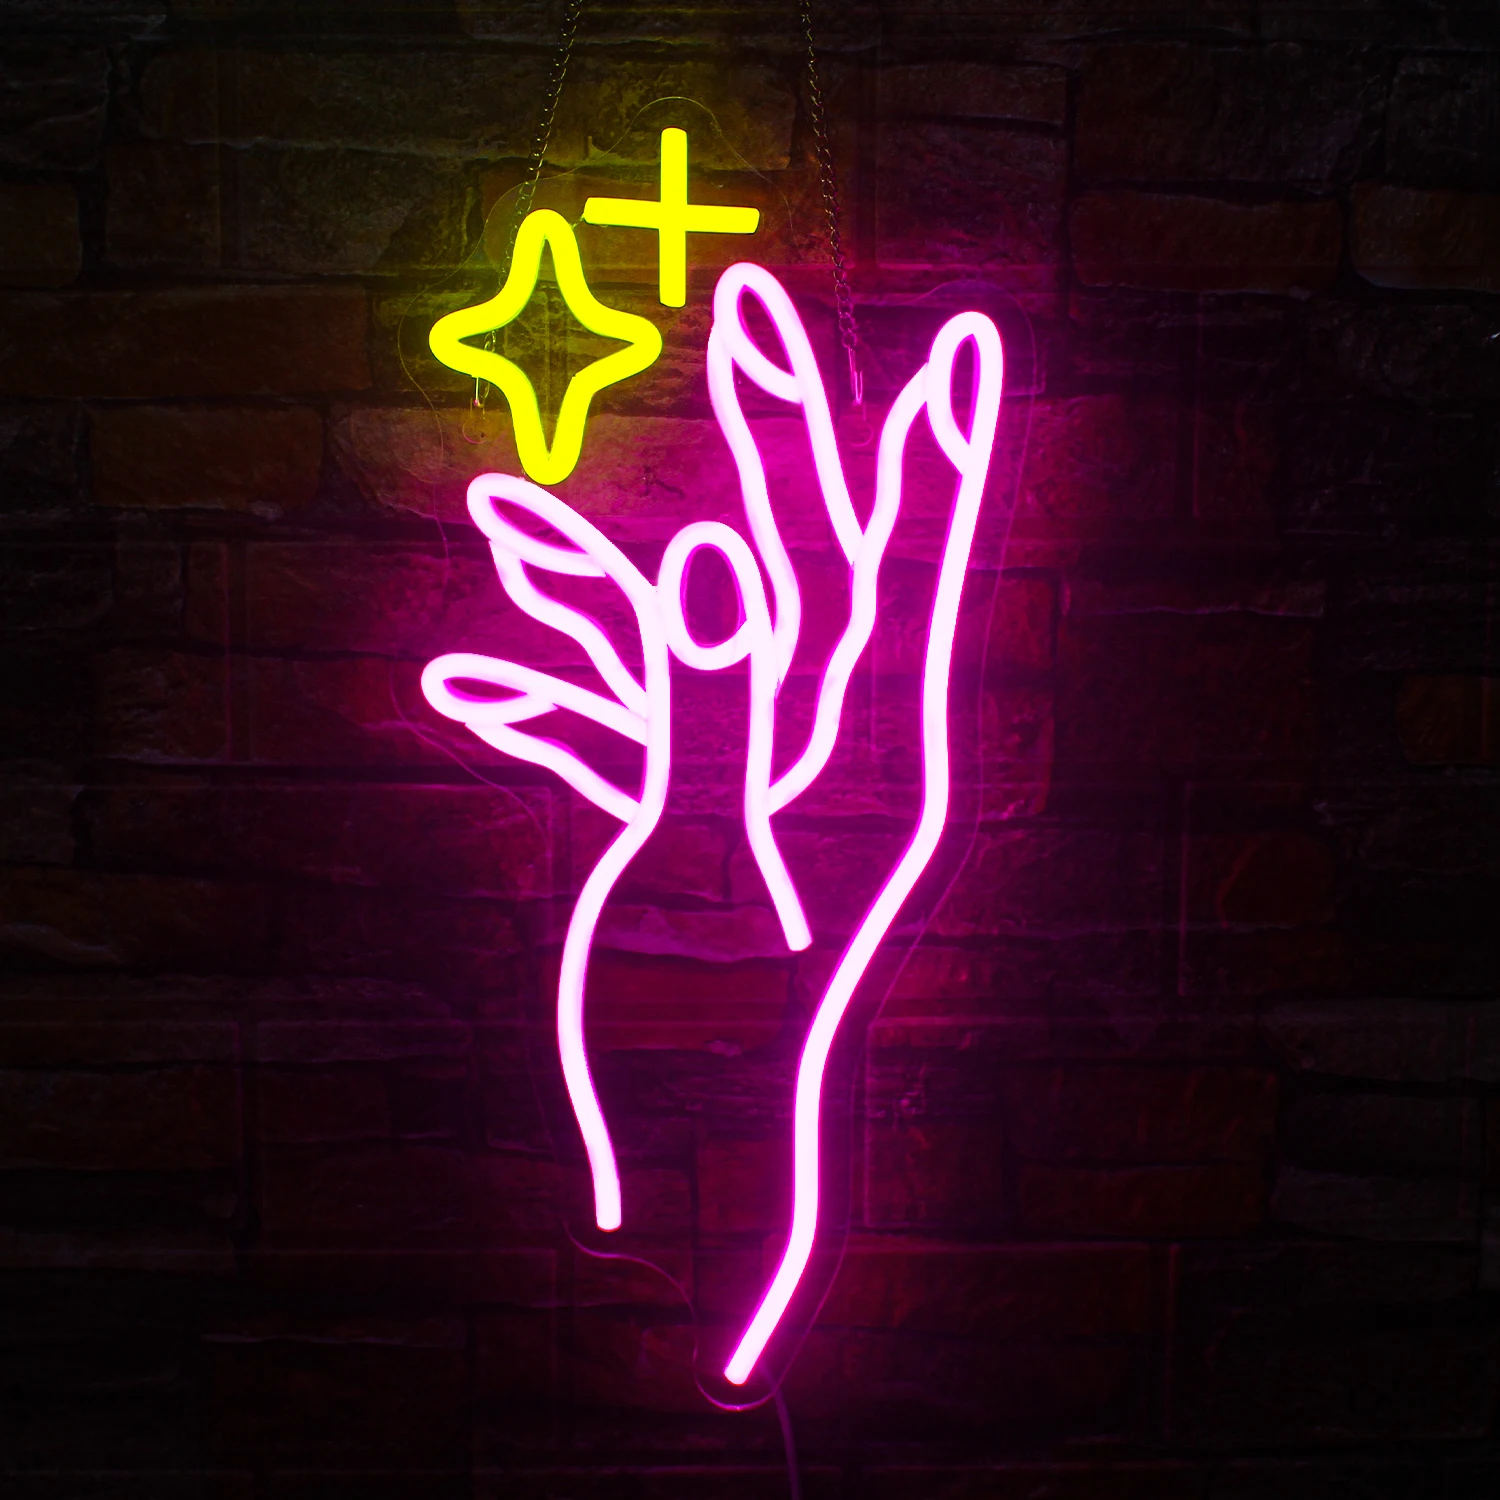 Yellow Star Hand Neon Sign Pink Nail Led Signs Wall Decor for Bedroom Girls Room Nail Salon Beauty Room Decoration Led Neon chair square outdoor table decoration restaurant sedentary desk table supplies picnic professional salon de jardin coffee tables